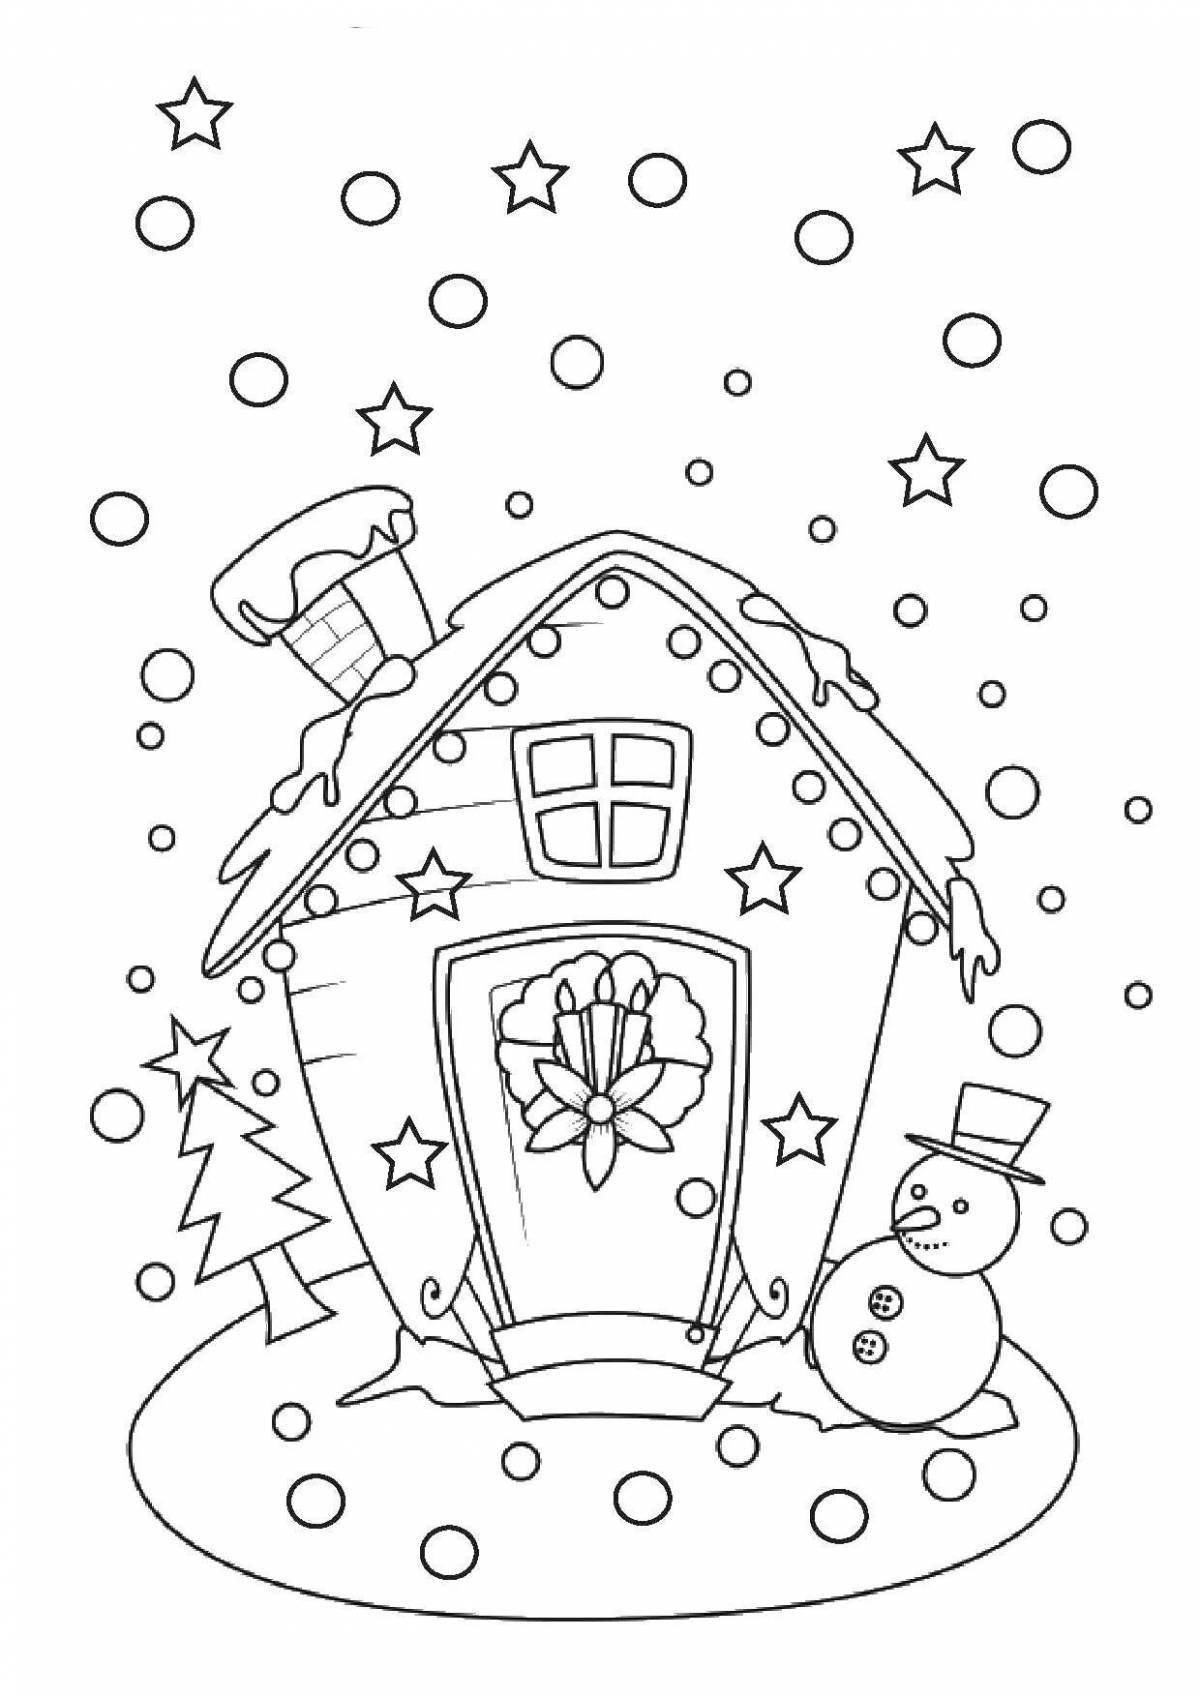 Bright winter house coloring for kids